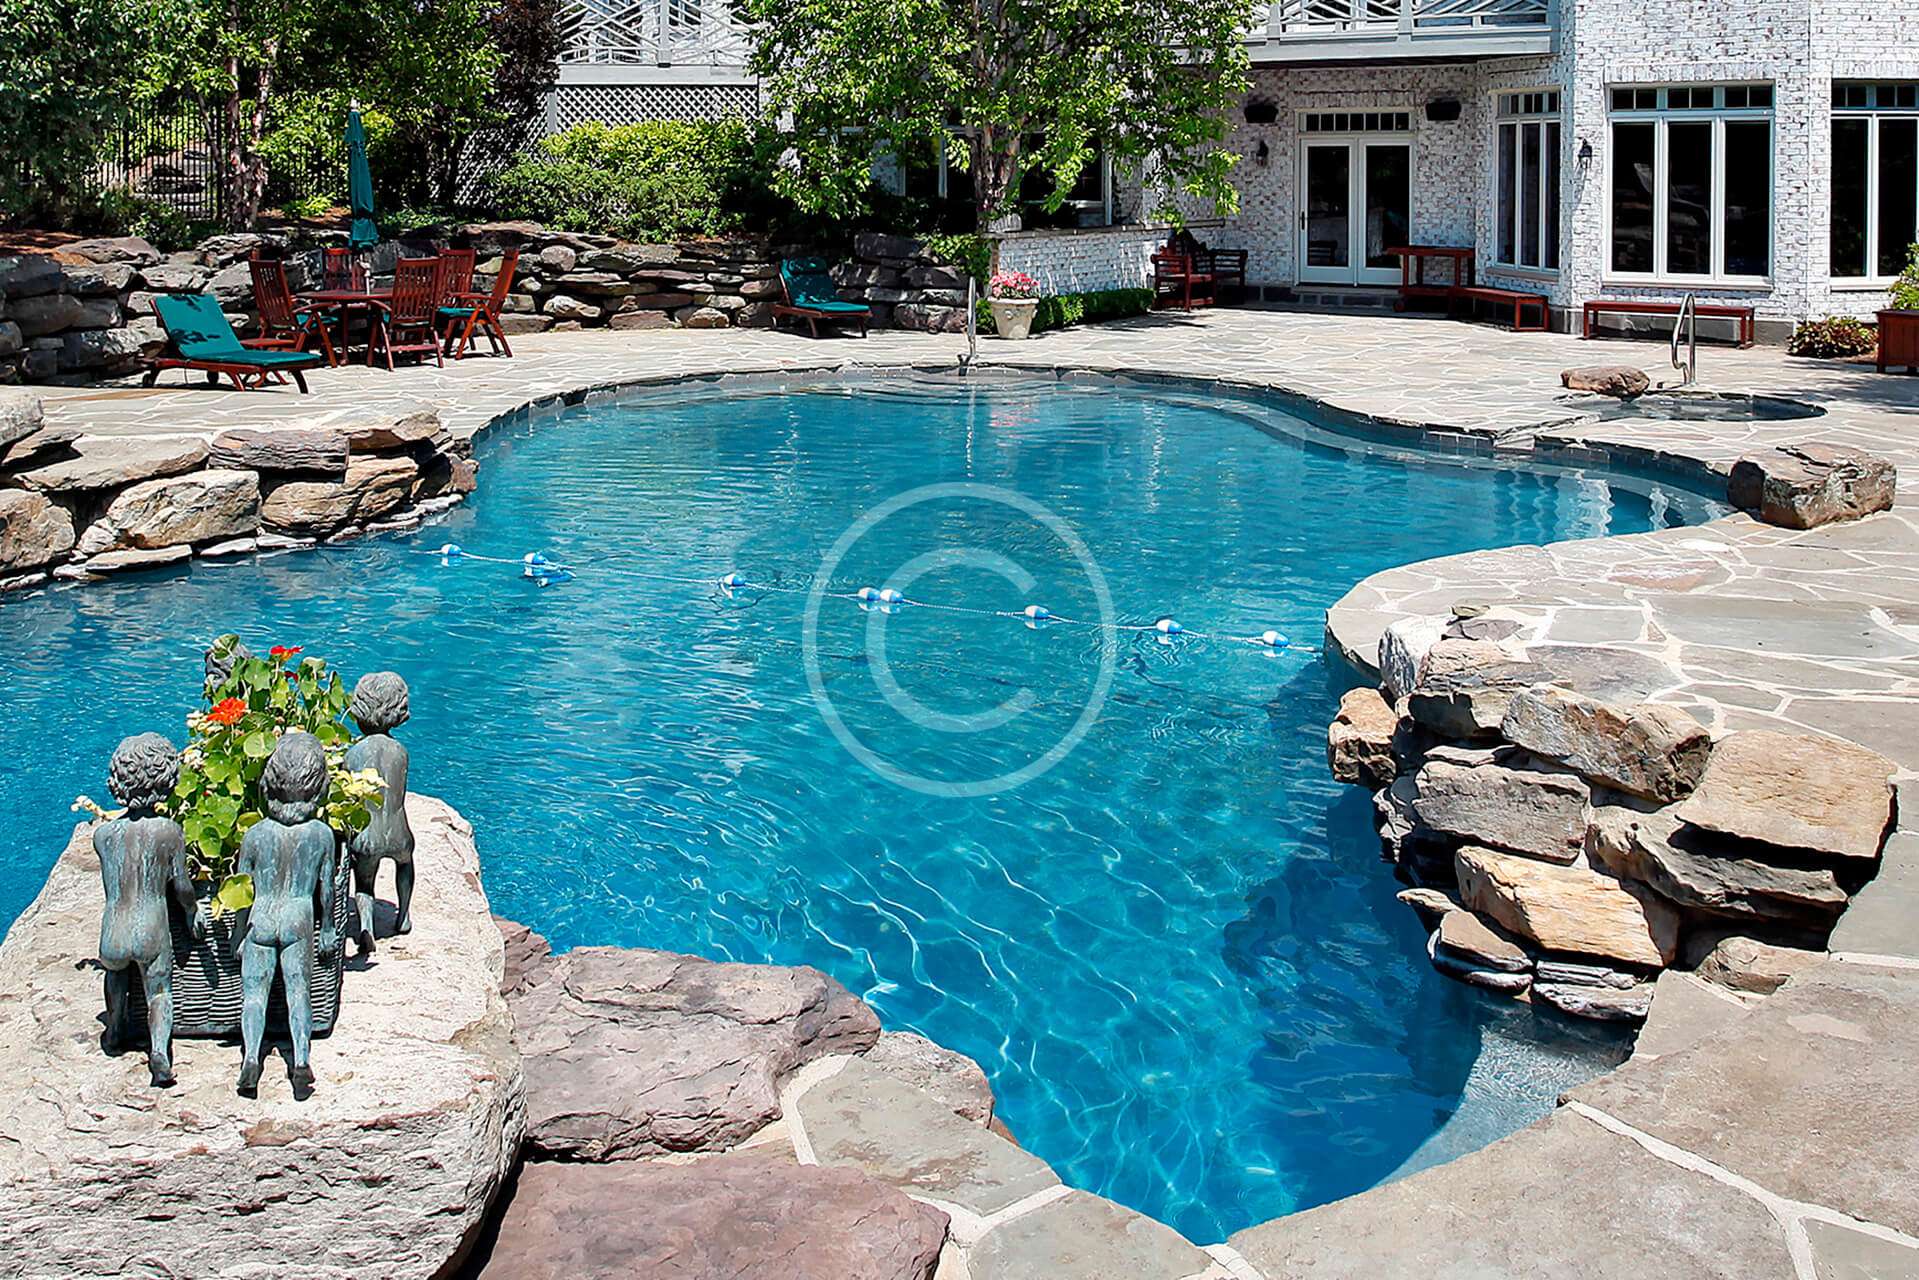 Luxury Landscape with a Pool as Pond Imitation